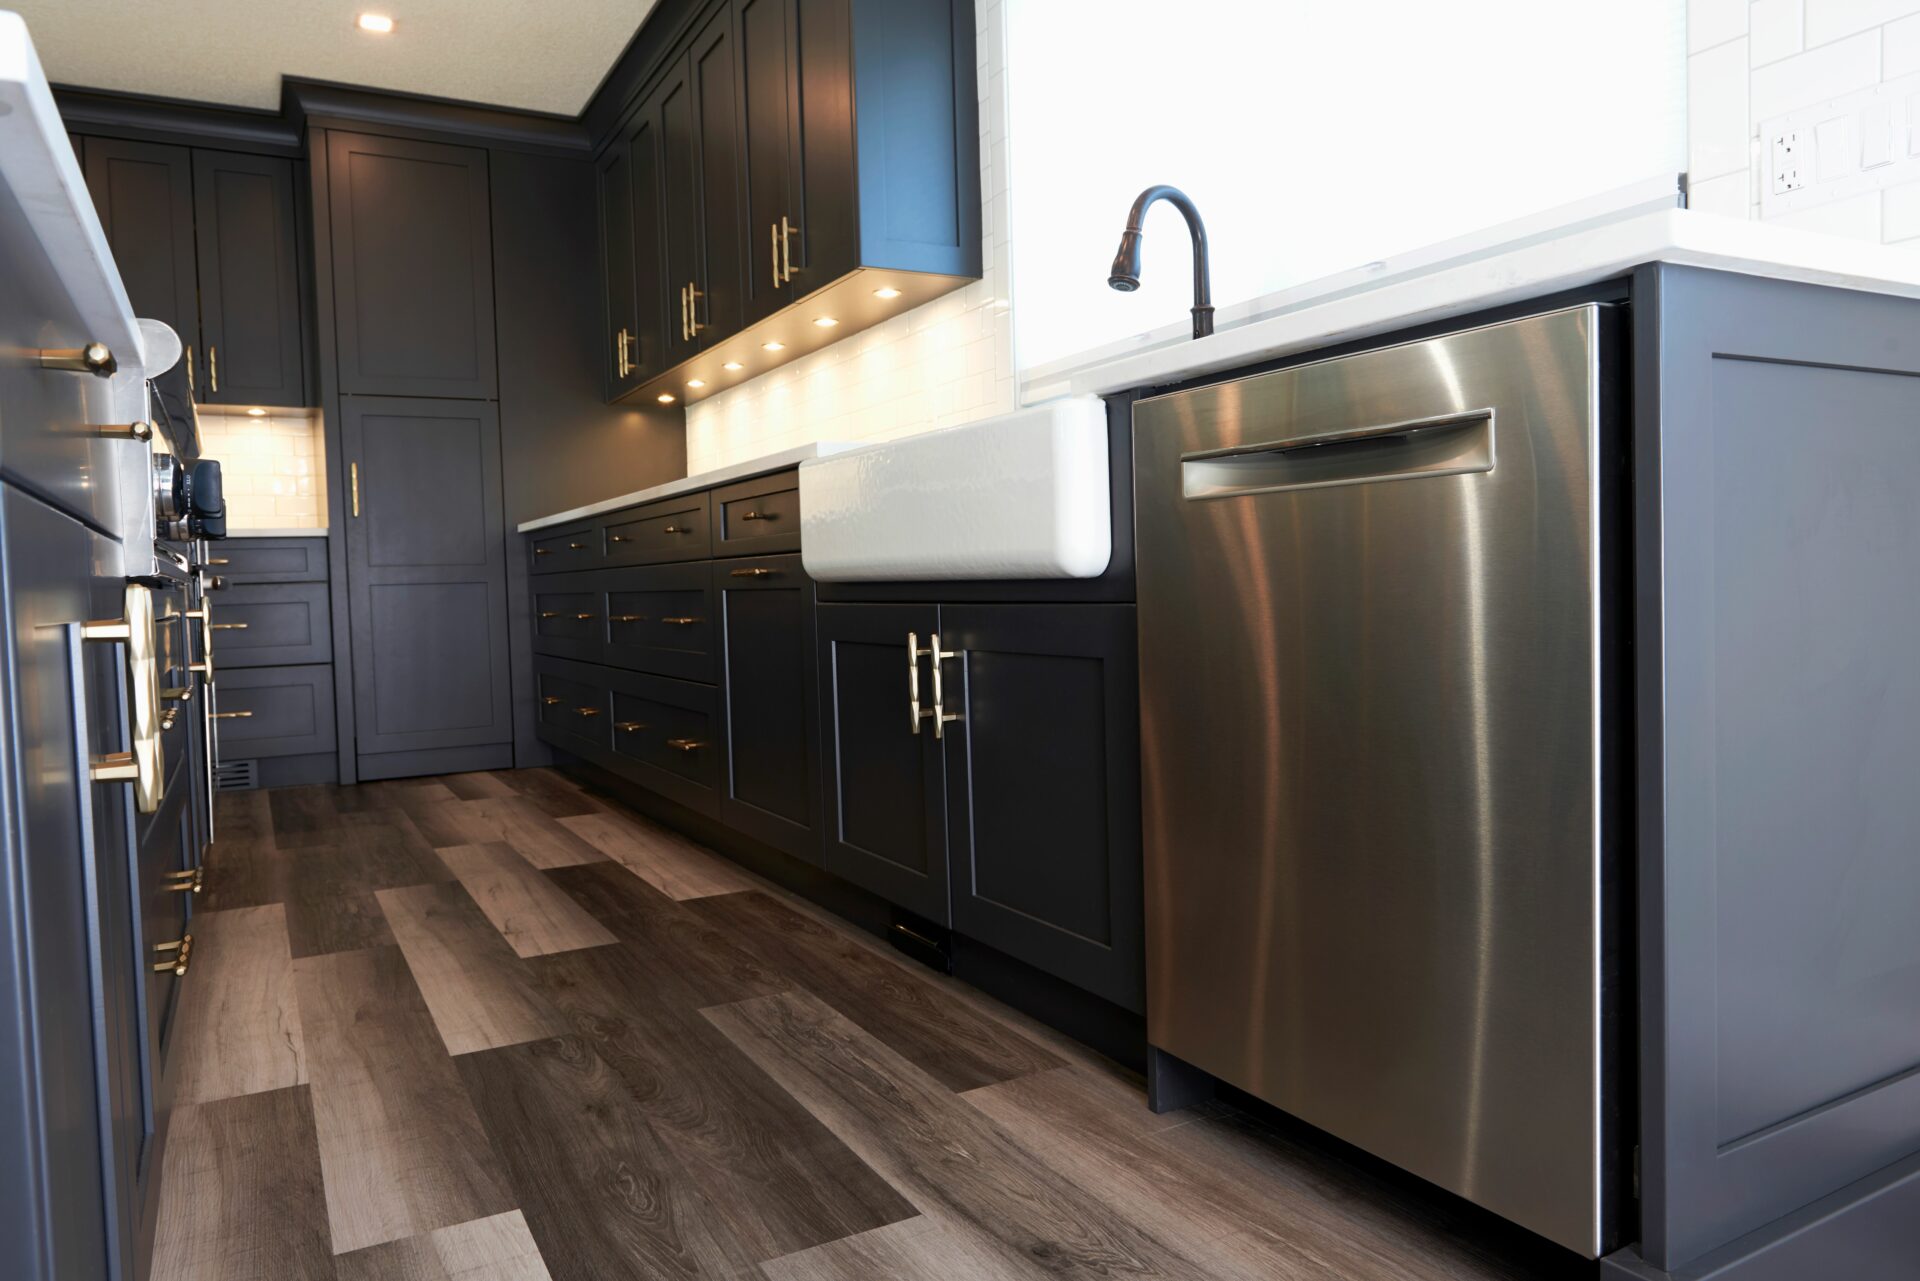 A kitchen with black cabinets and stainless steel appliances.